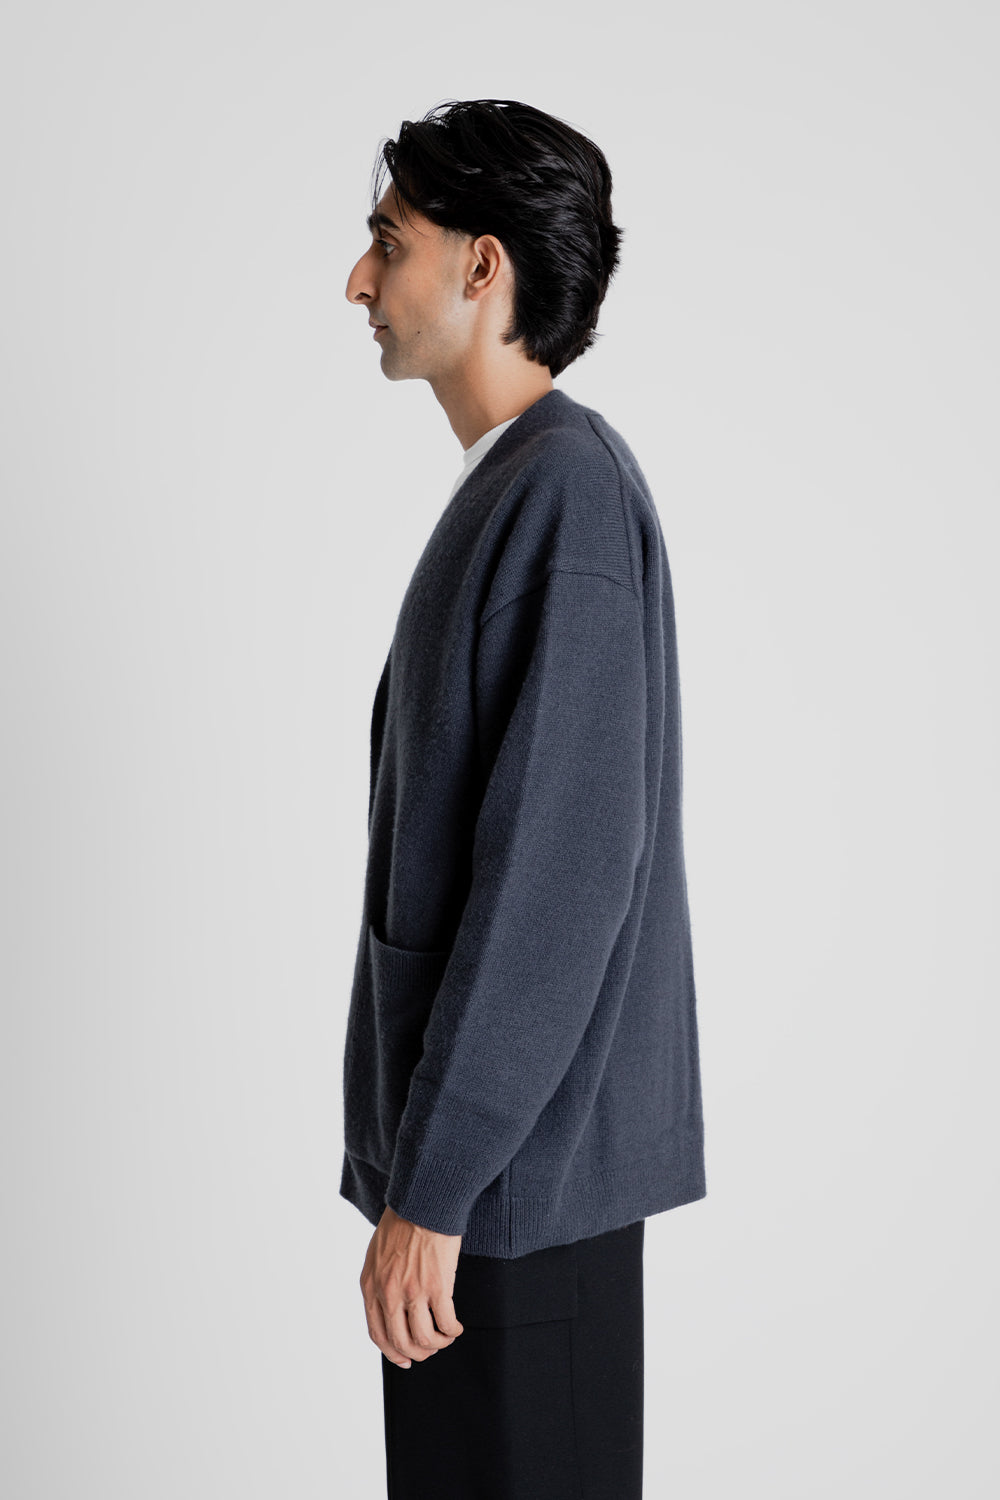 ATON Wool Cotton Brushed Oversized Cardigan in Charcoal Grey